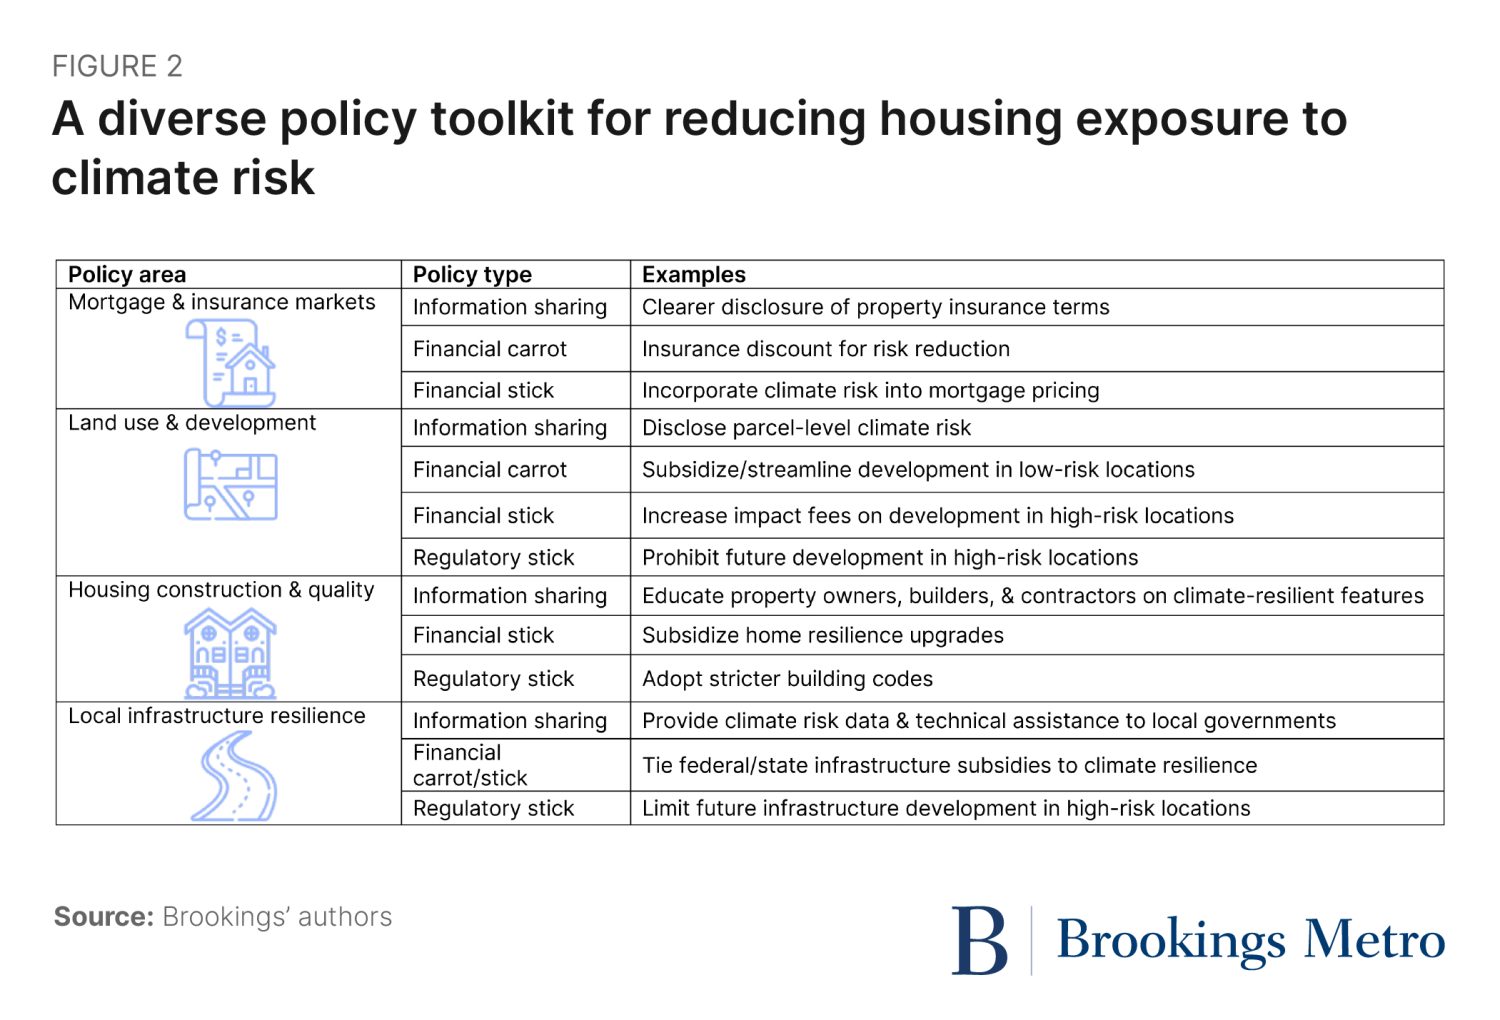 Figure 2: A diverse policy toolkit for reducing housing exposure to climate risk